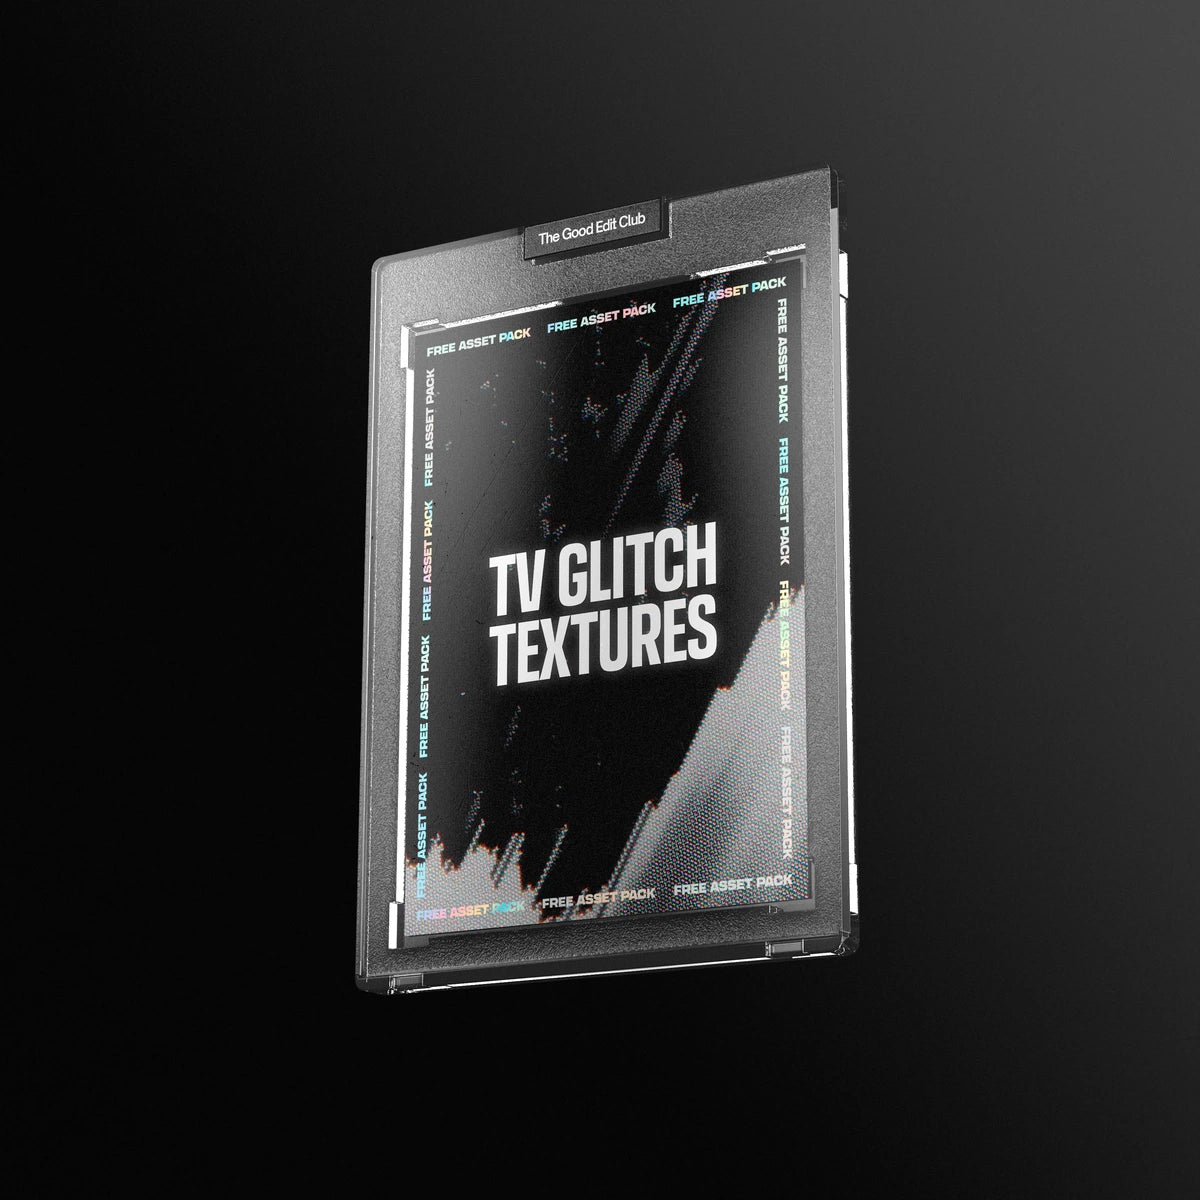 Product image for TV Glitch Textures, free video asset pack, from The Good Edit Club.